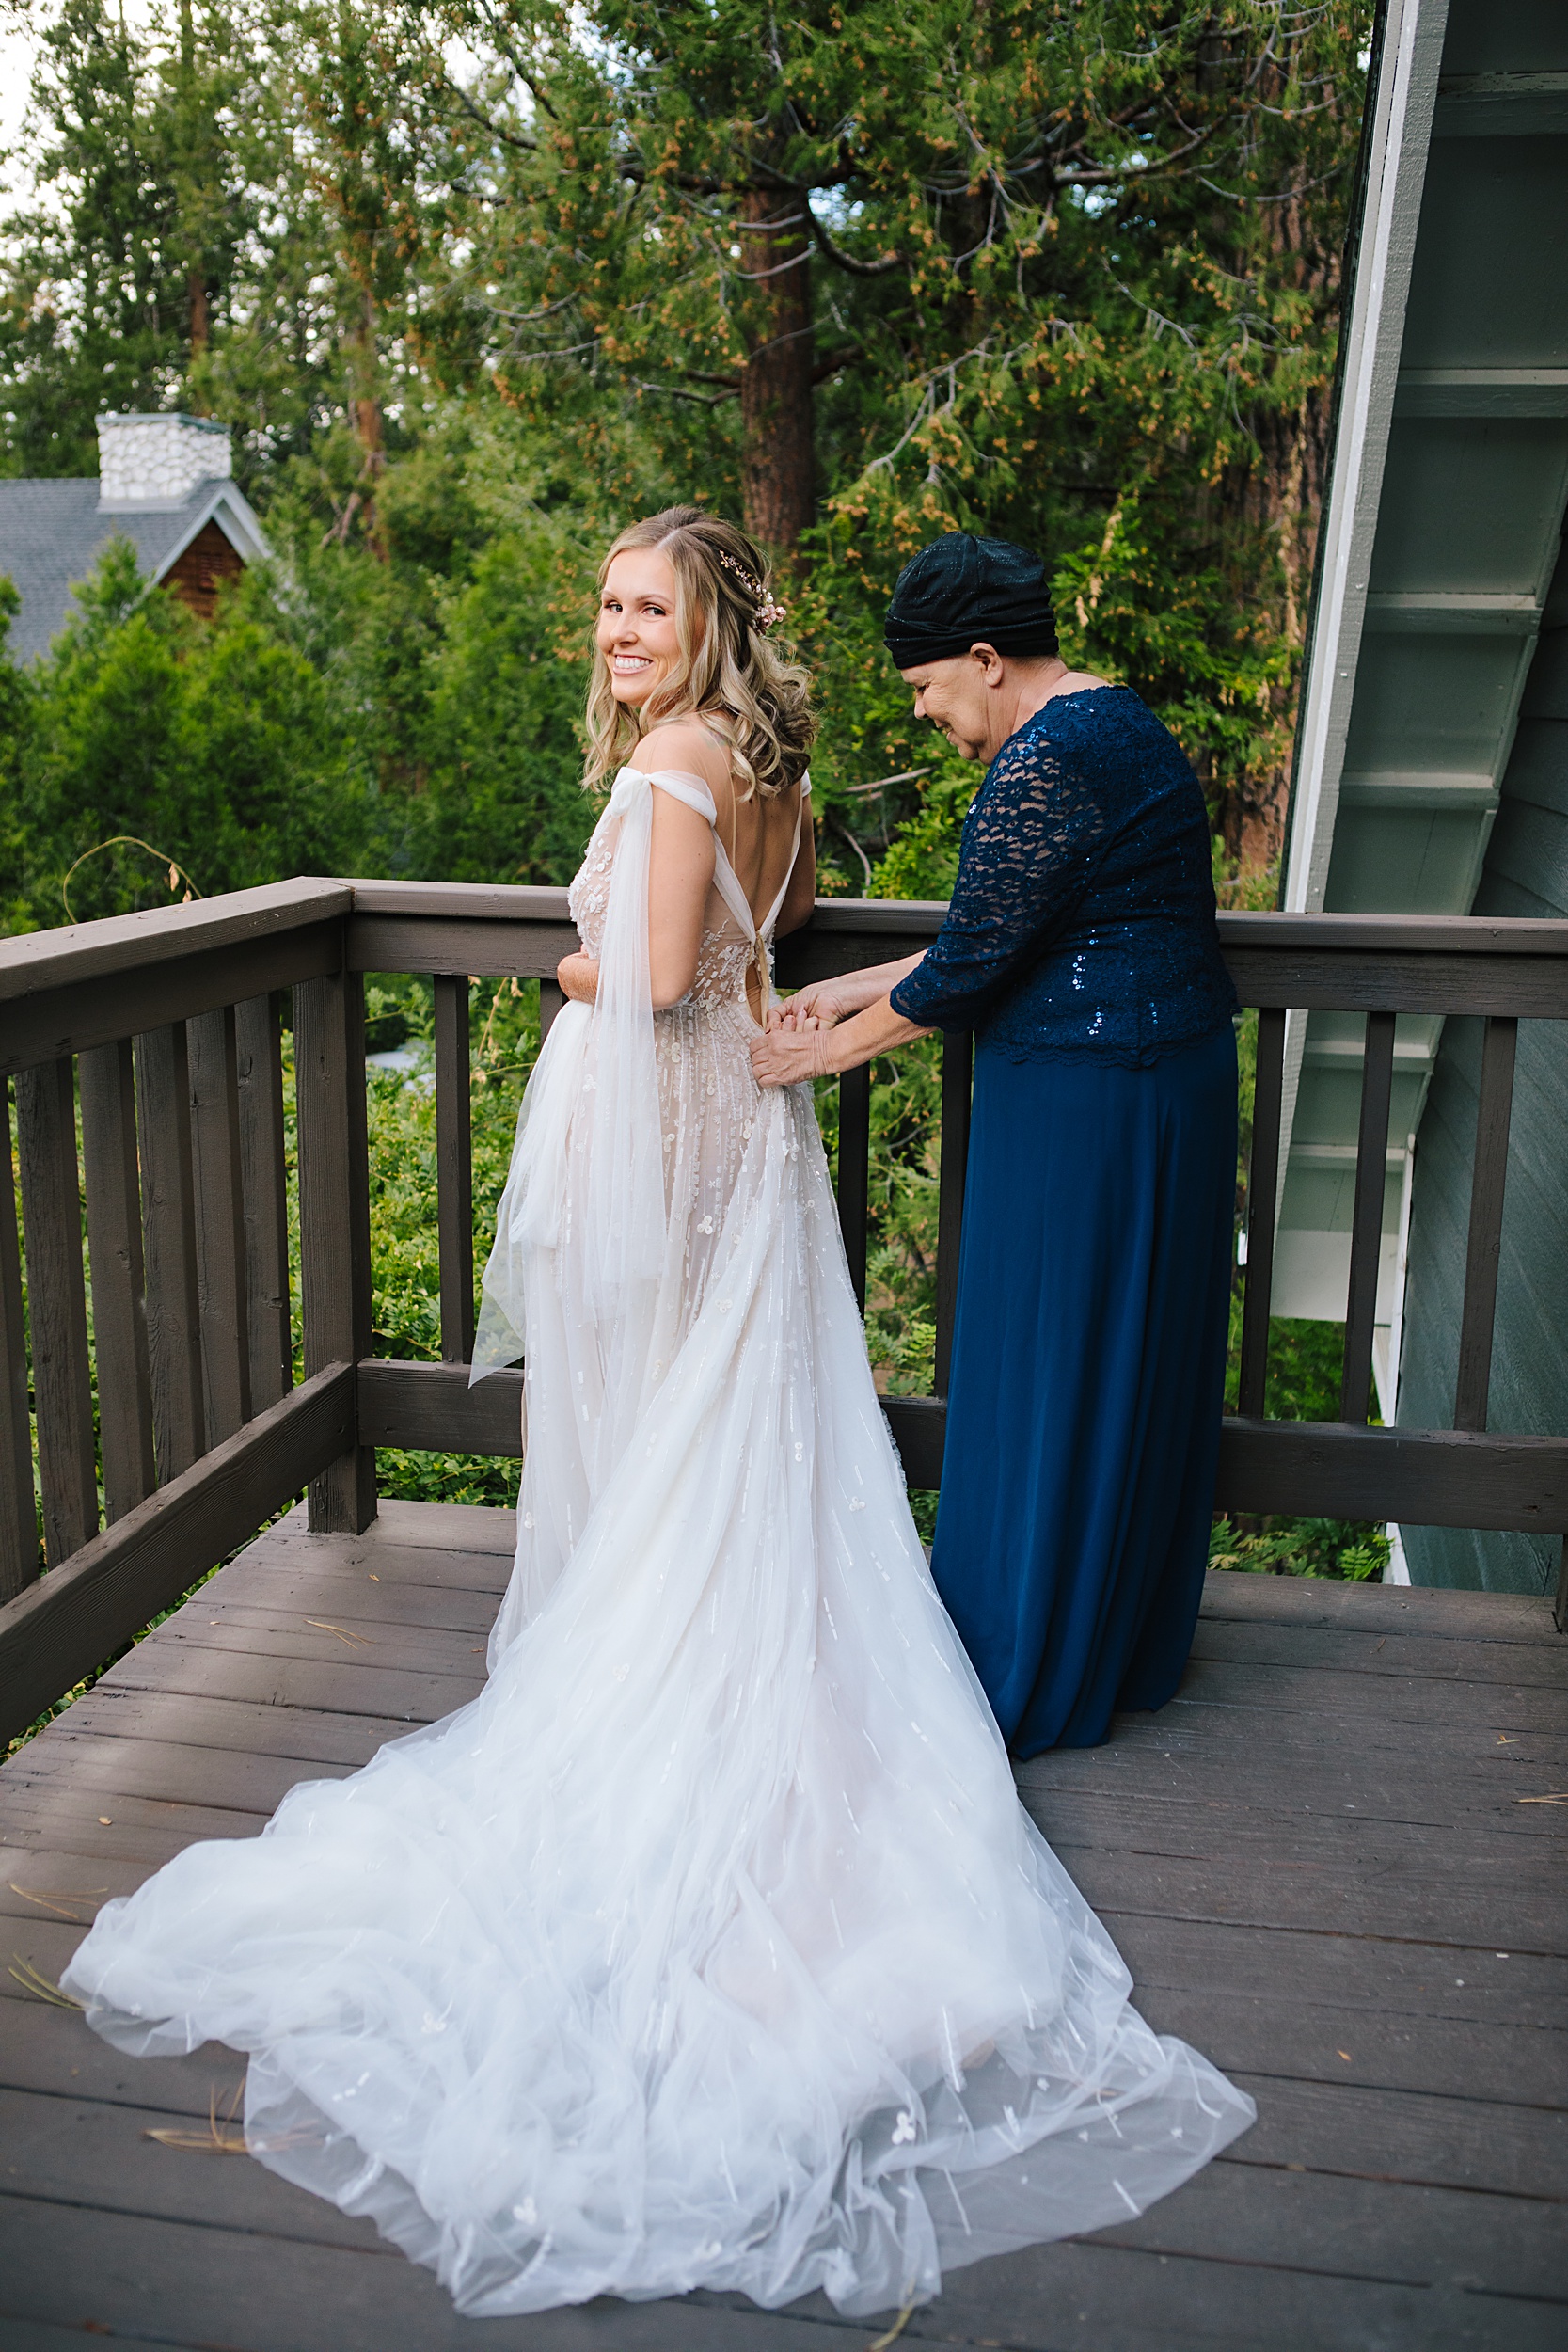 Rachelle-and-Steven-17 Romantic Idyllwild Forest Elopement with Family￼